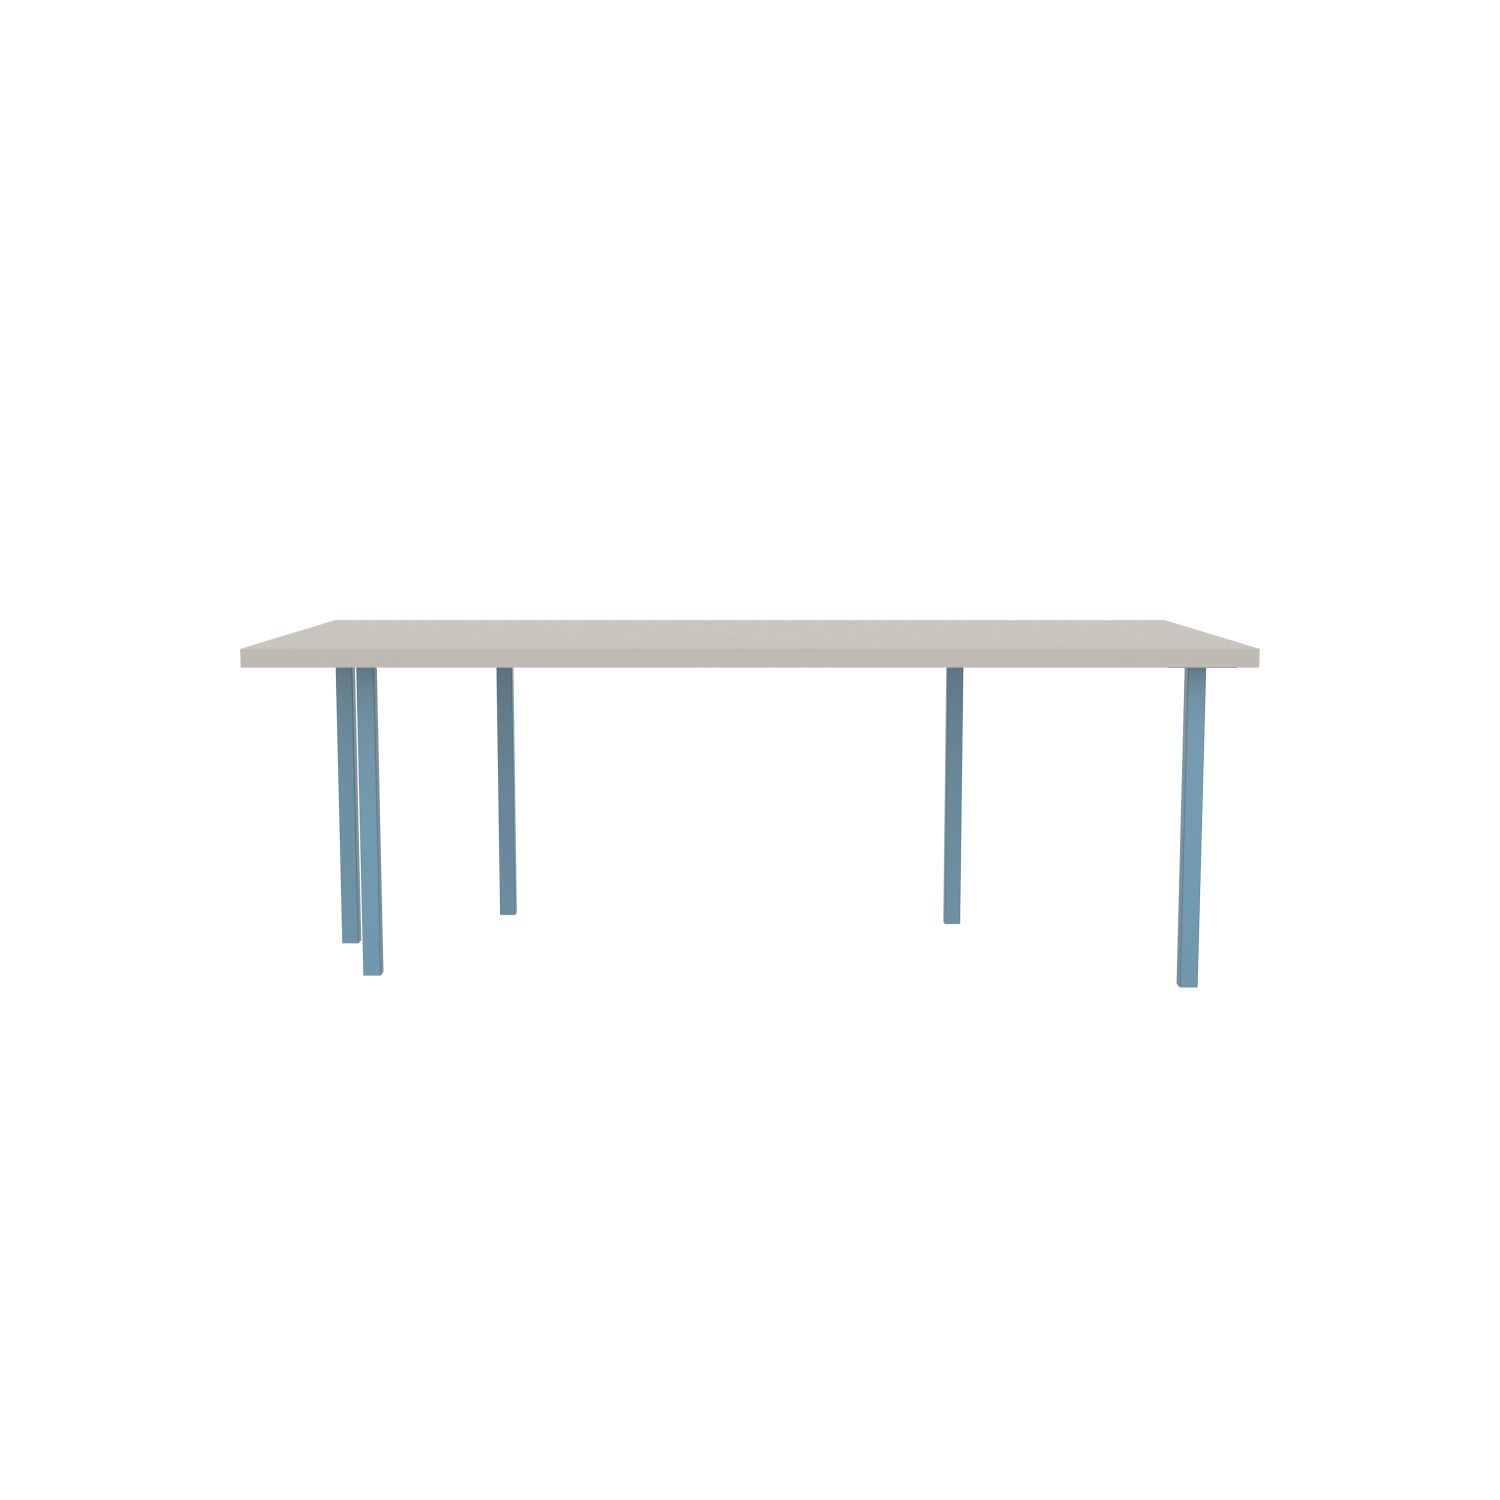 lensvelt bbrand table five fixed heigt 103x218 hpl white 50 mm price level 1 blue ral5024